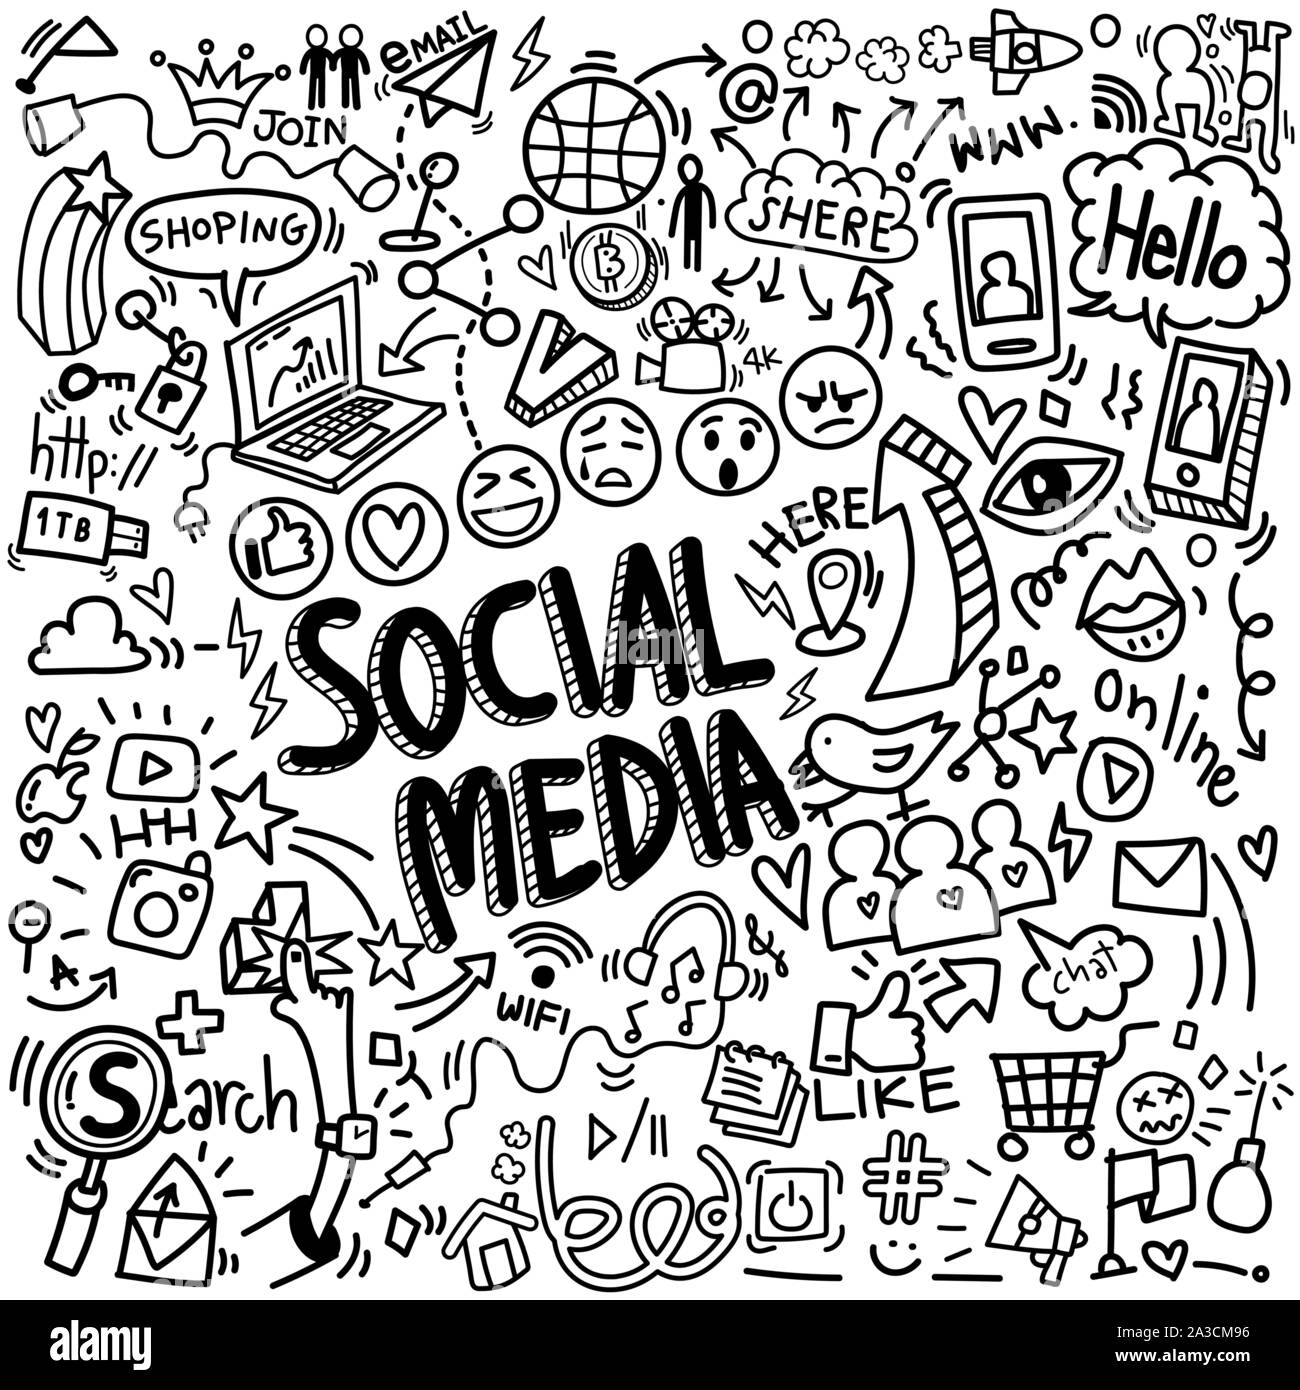 vector of objects and symbols on social media element, doodles sketch illustration Stock Vector